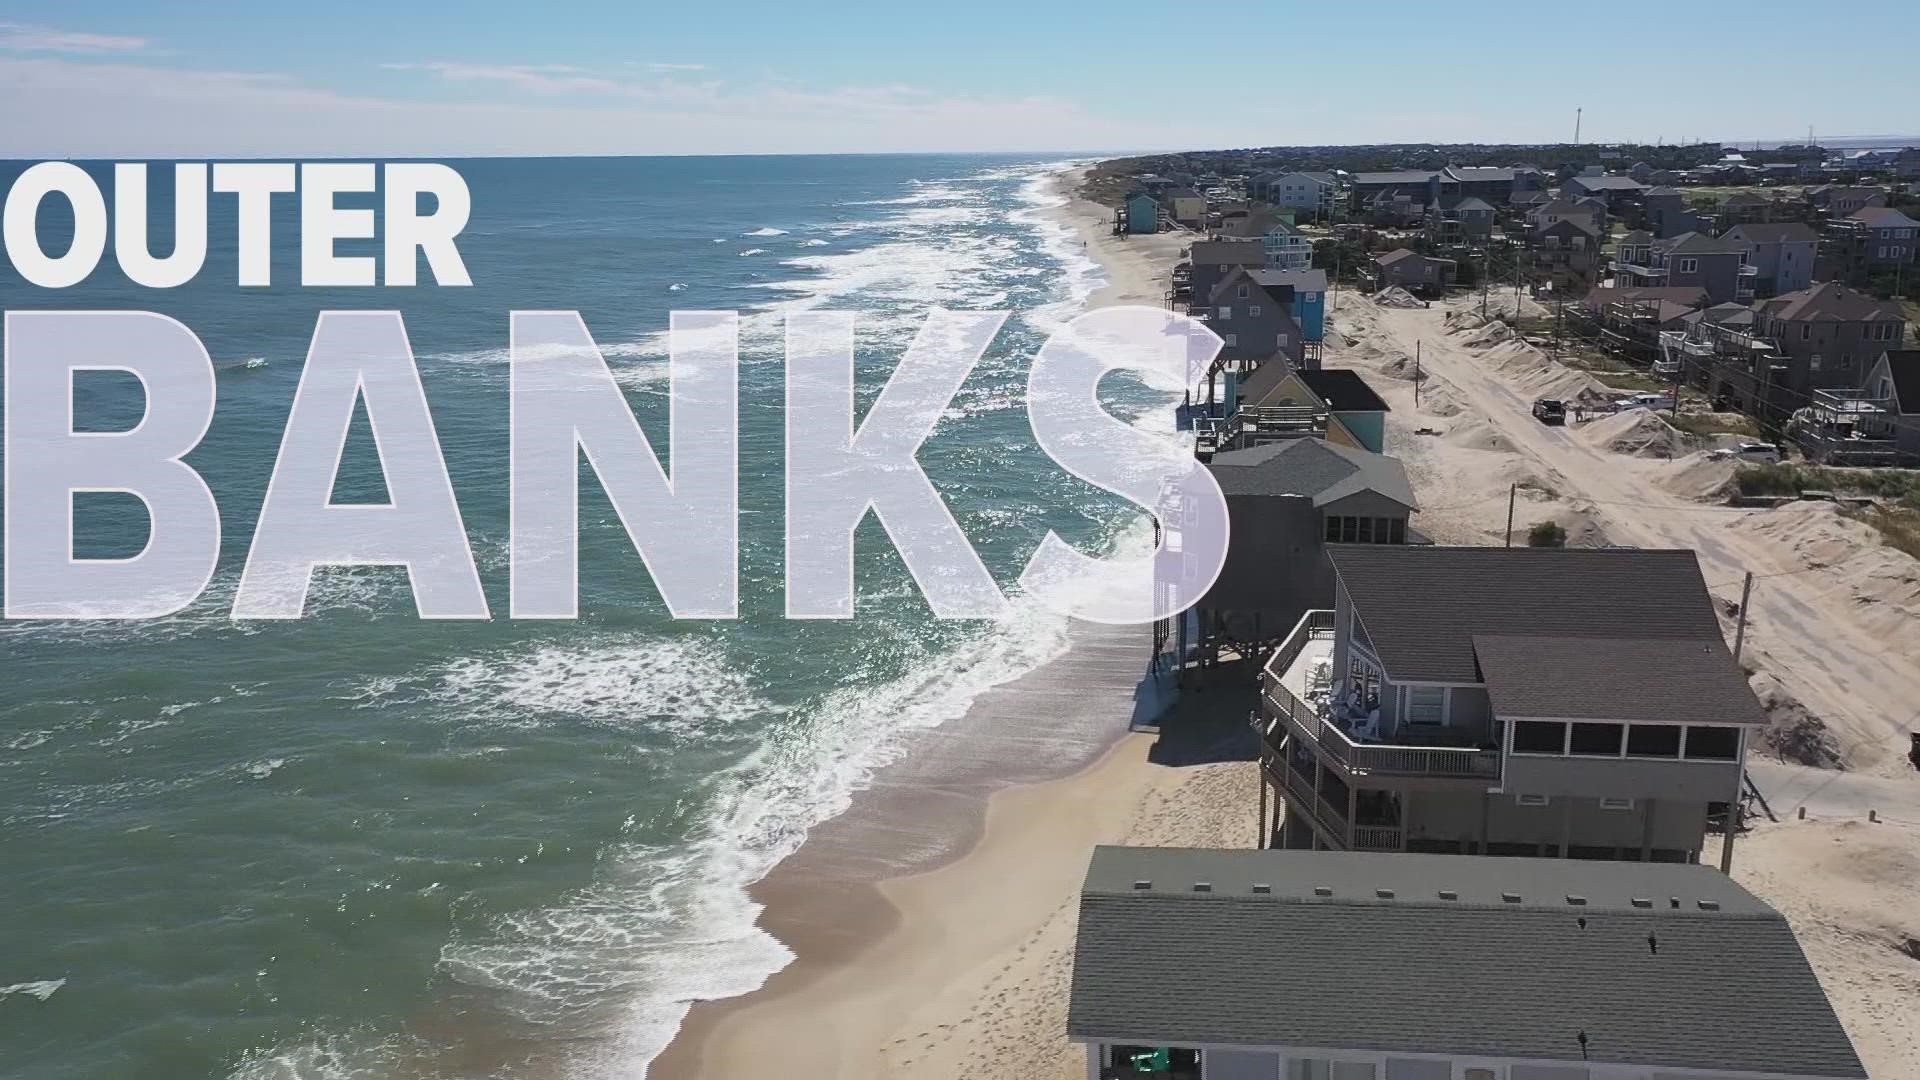 Sea level rise and increasing beach erosion have Outer Banks leaders spending millions to replace eroding beaches.